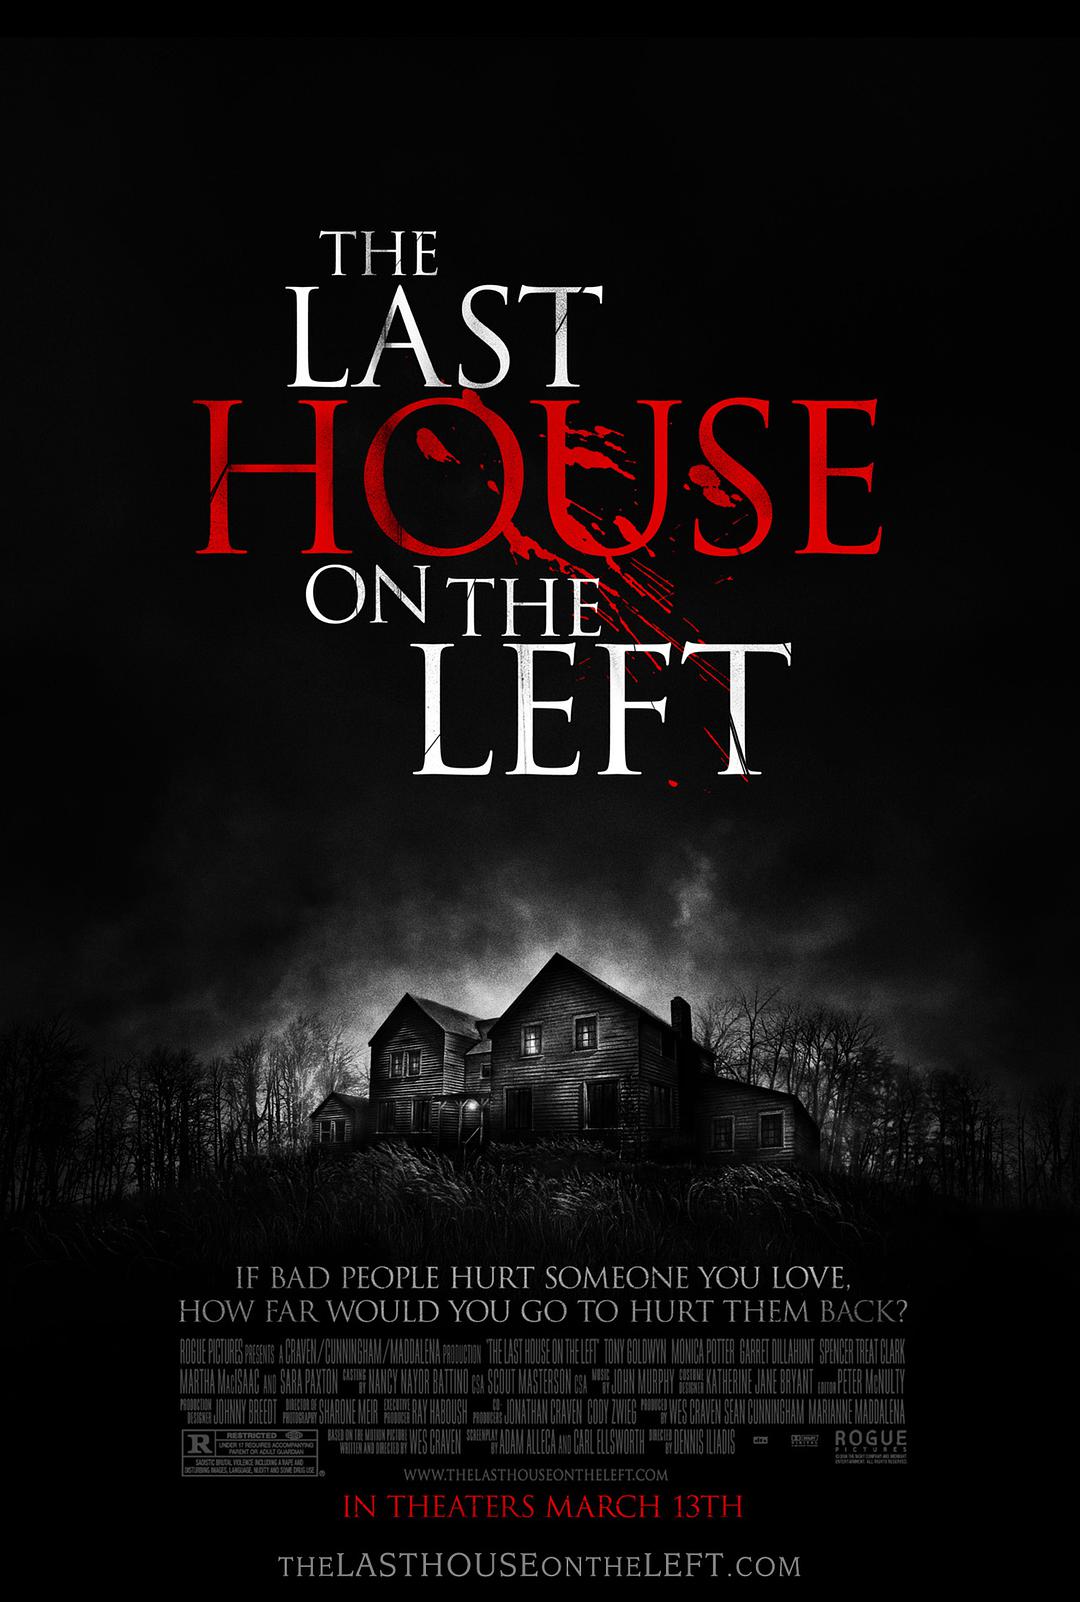 ɱ˲/Ǵ The.Last.House.On.The.Left.2009.1080p.BluRay.x264.DTS-FGT 7.95GB-1.png